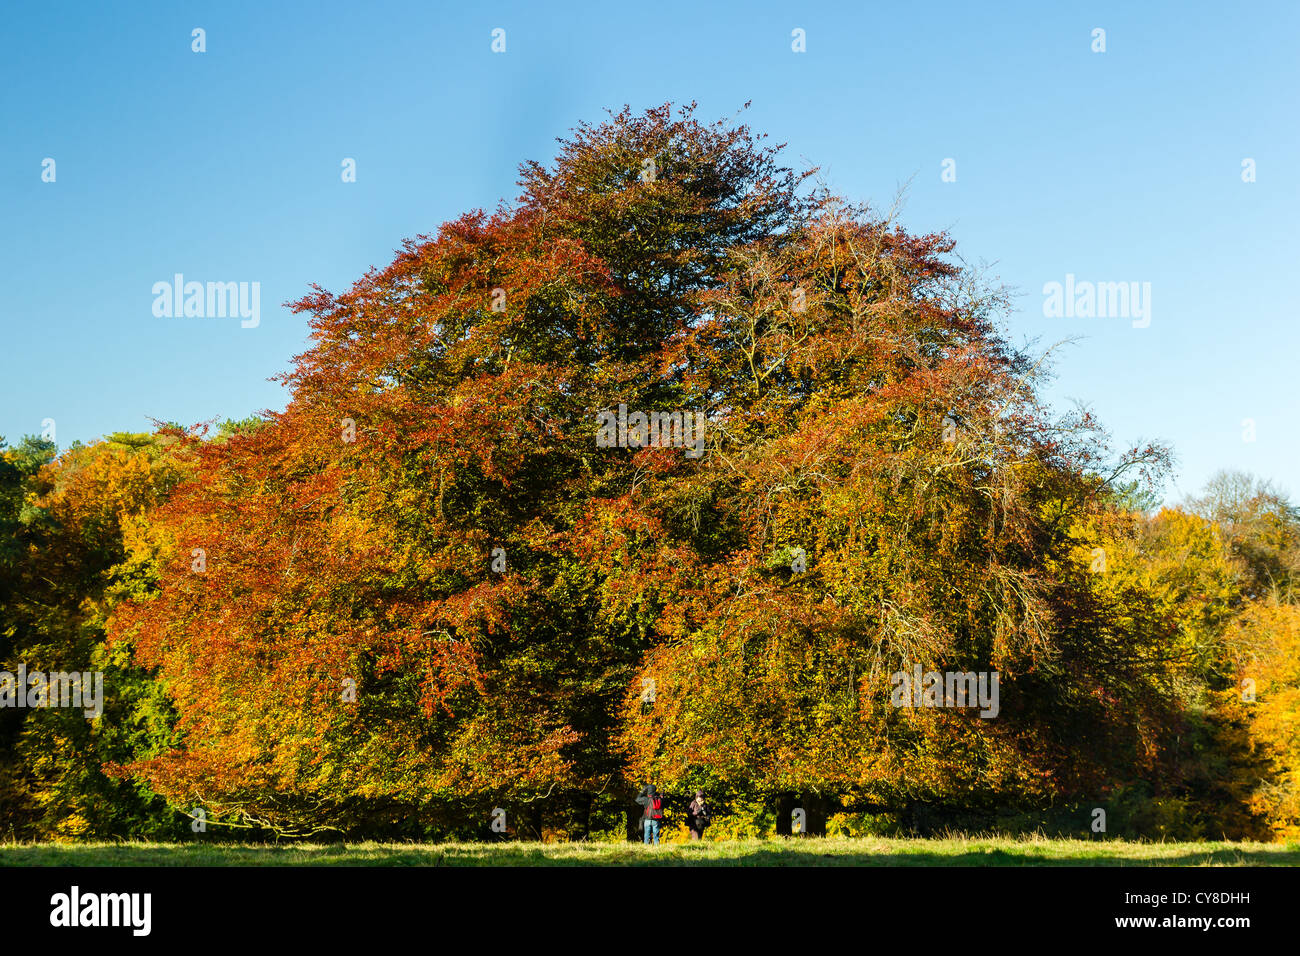 A large Maple tree showing brown, orange and yellow autumn colours on a sunny day Stock Photo